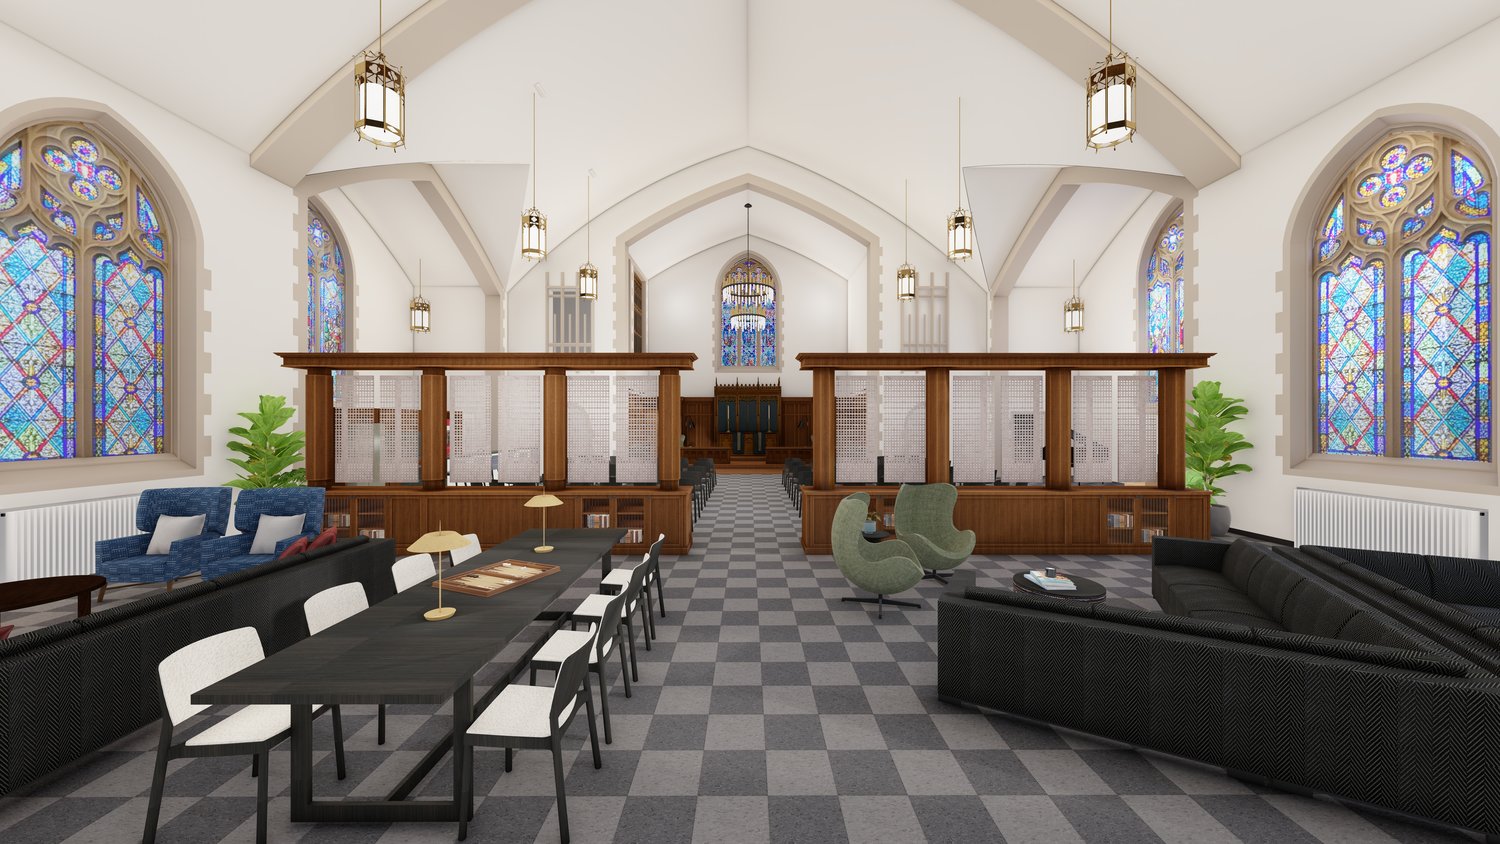 Inside Calvary Lutheran Church, the Sanctuary will be divided to make room for a community space. (Rendering by UrbanWorks Architecture)